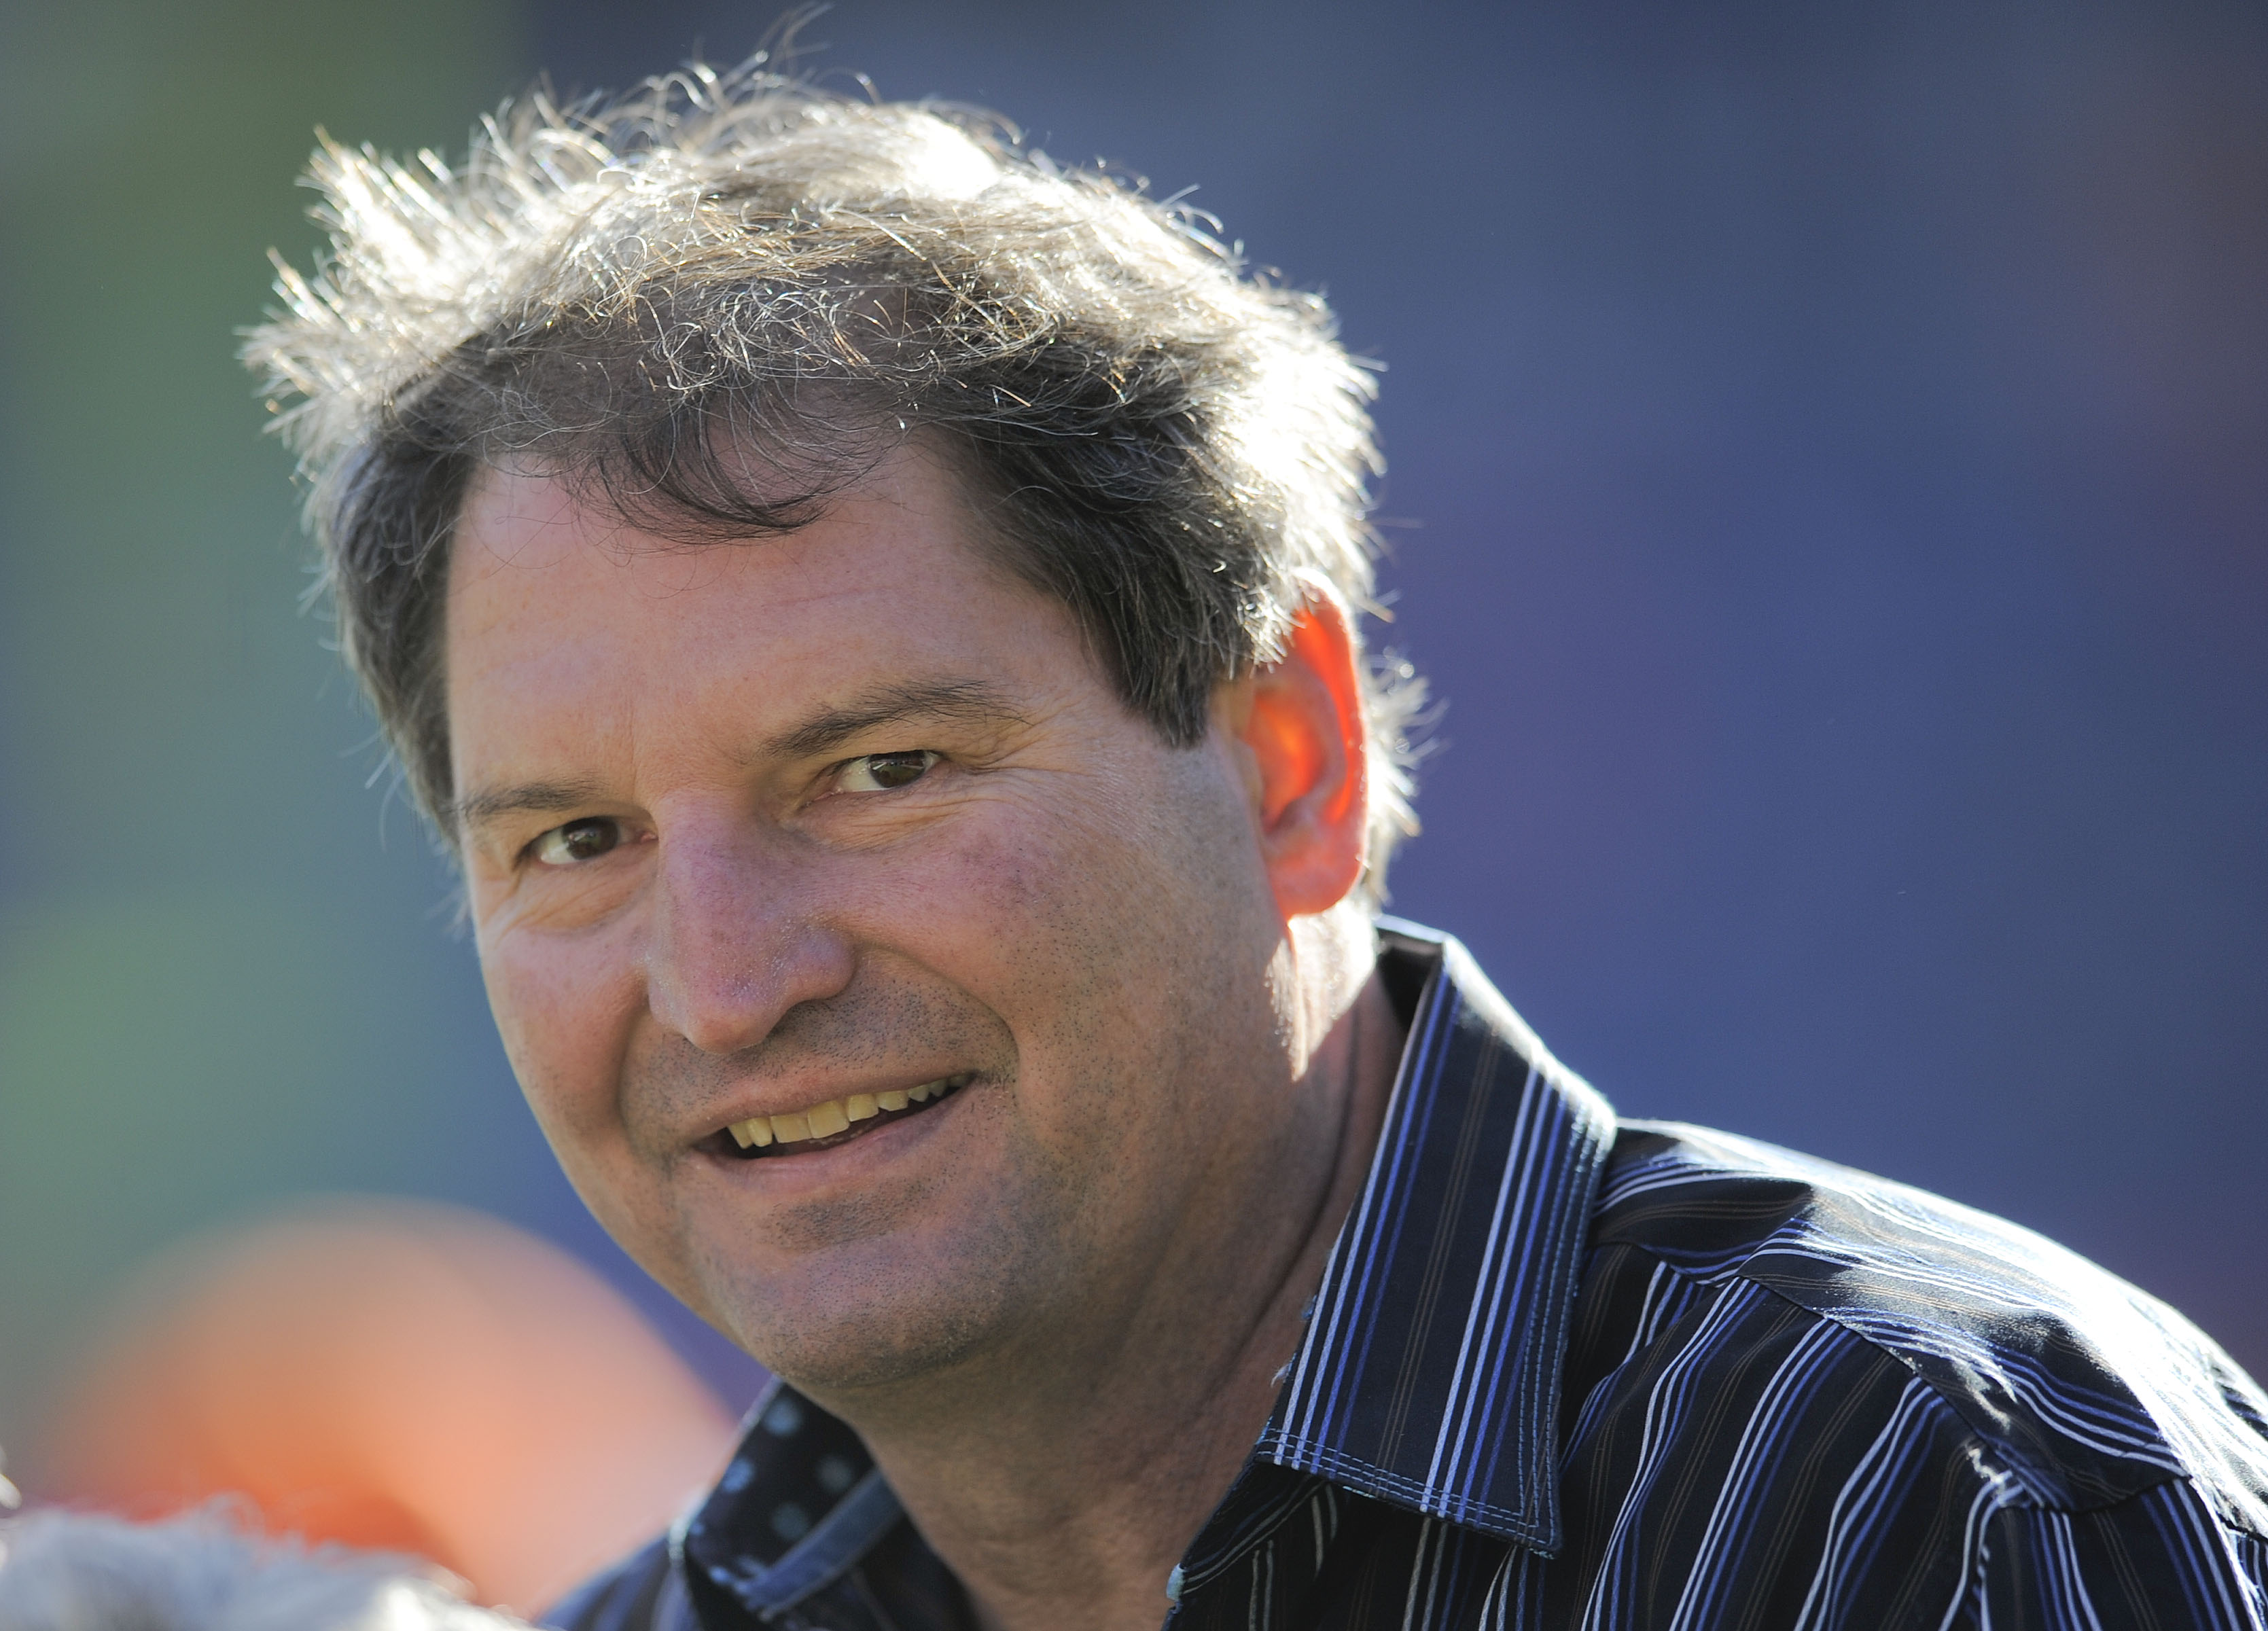 Former Cleveland Browns quarterback Bernie Kosar is pictured on the sideline before of an NFL football game between the Denver Broncos and the Cleveland Browns, Sunday, Dec. 23, 2012, in Denver. (AP Photo/Jack Dempsey)